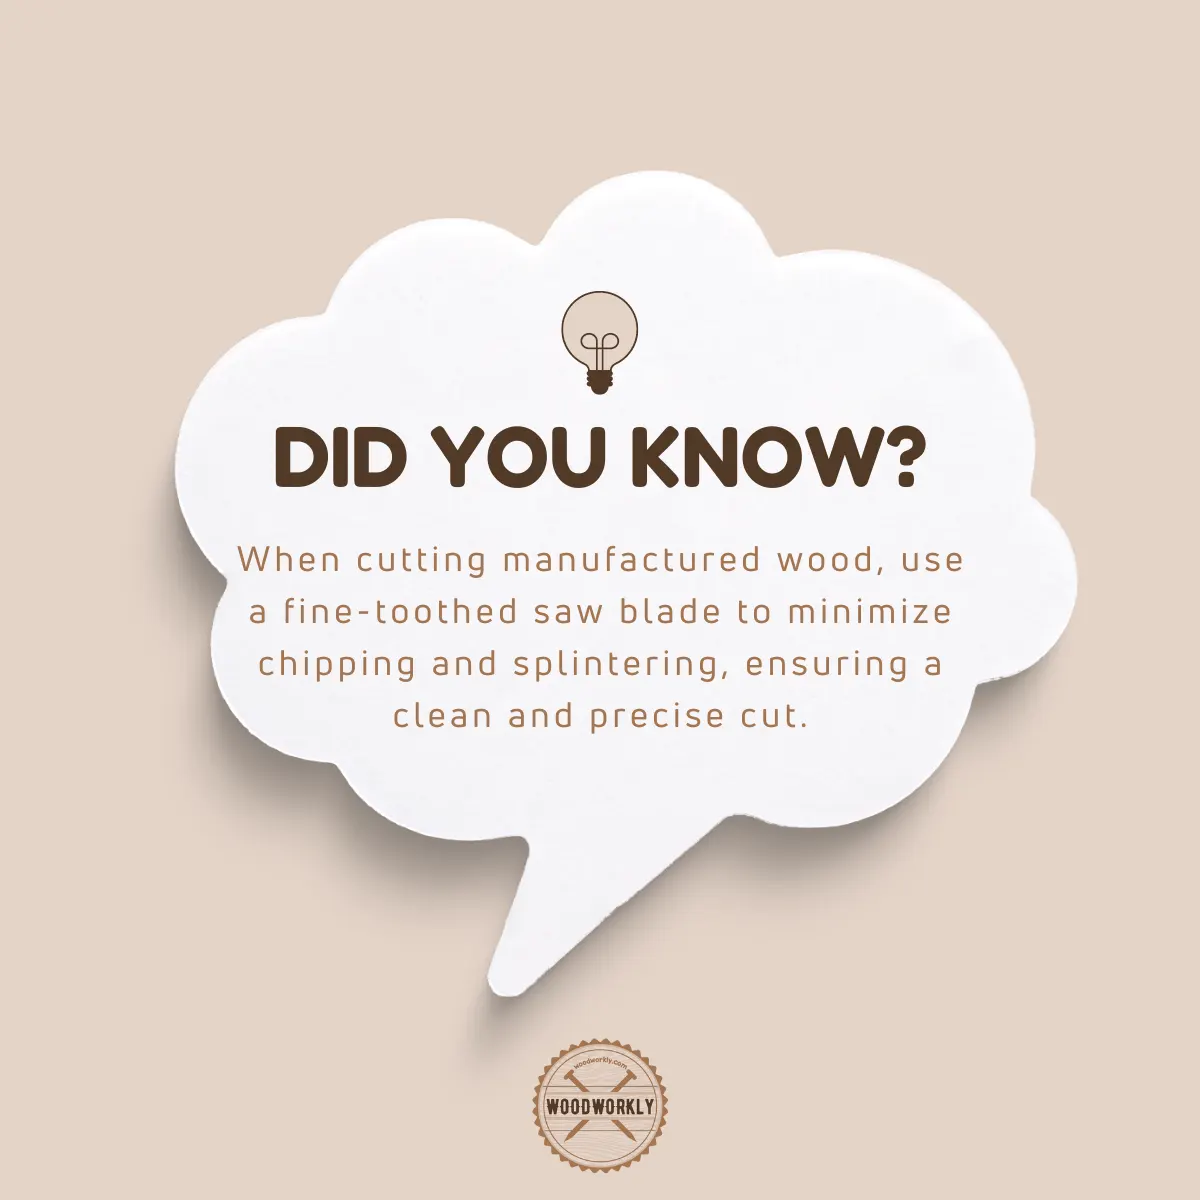 did you know tip about manufactured wood